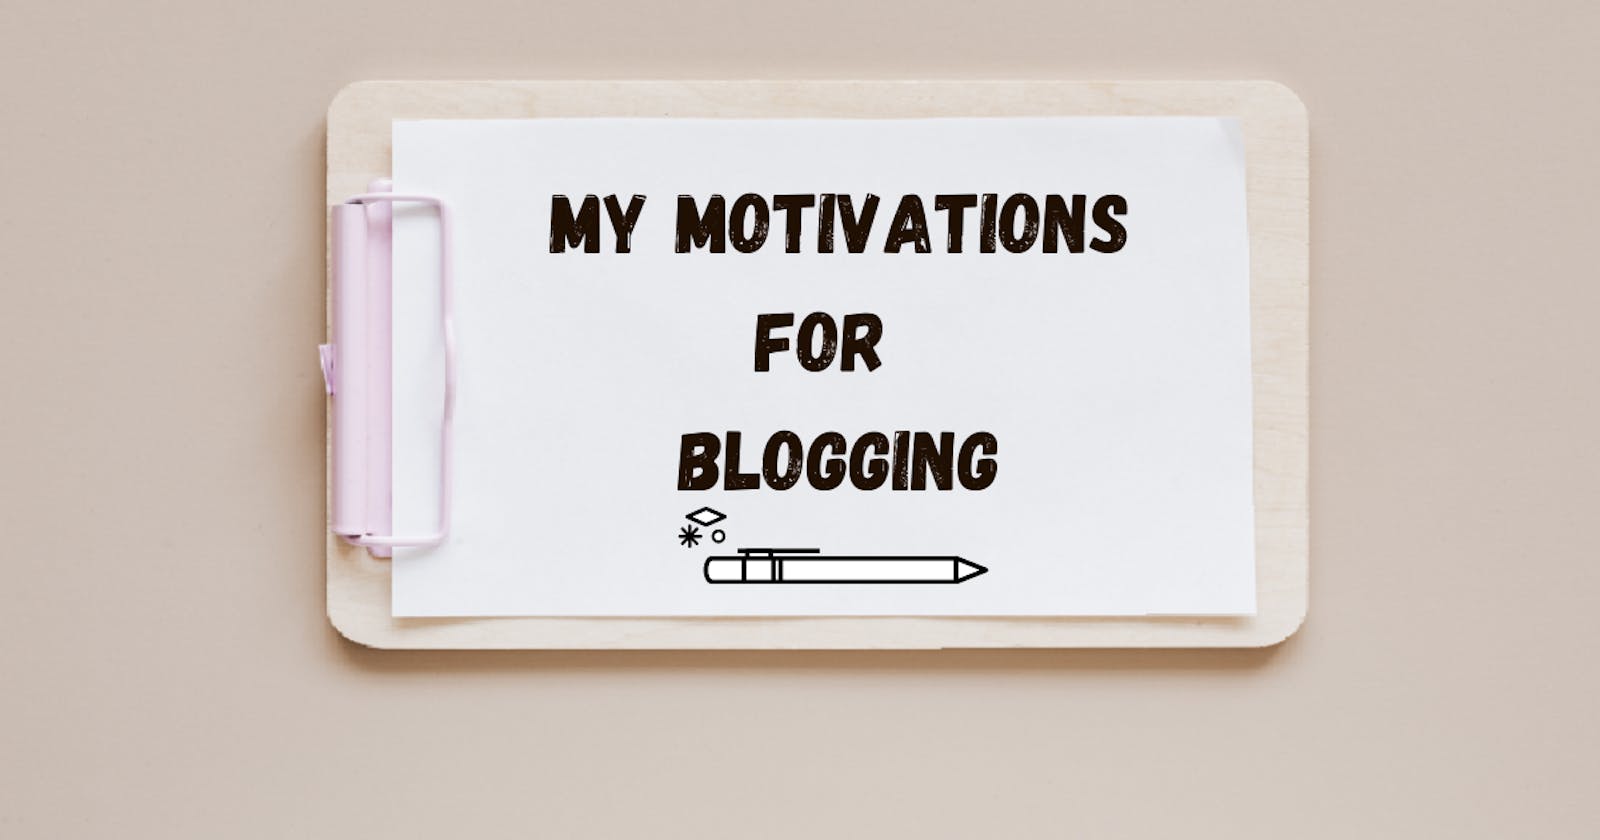 What are my motivations to blog?